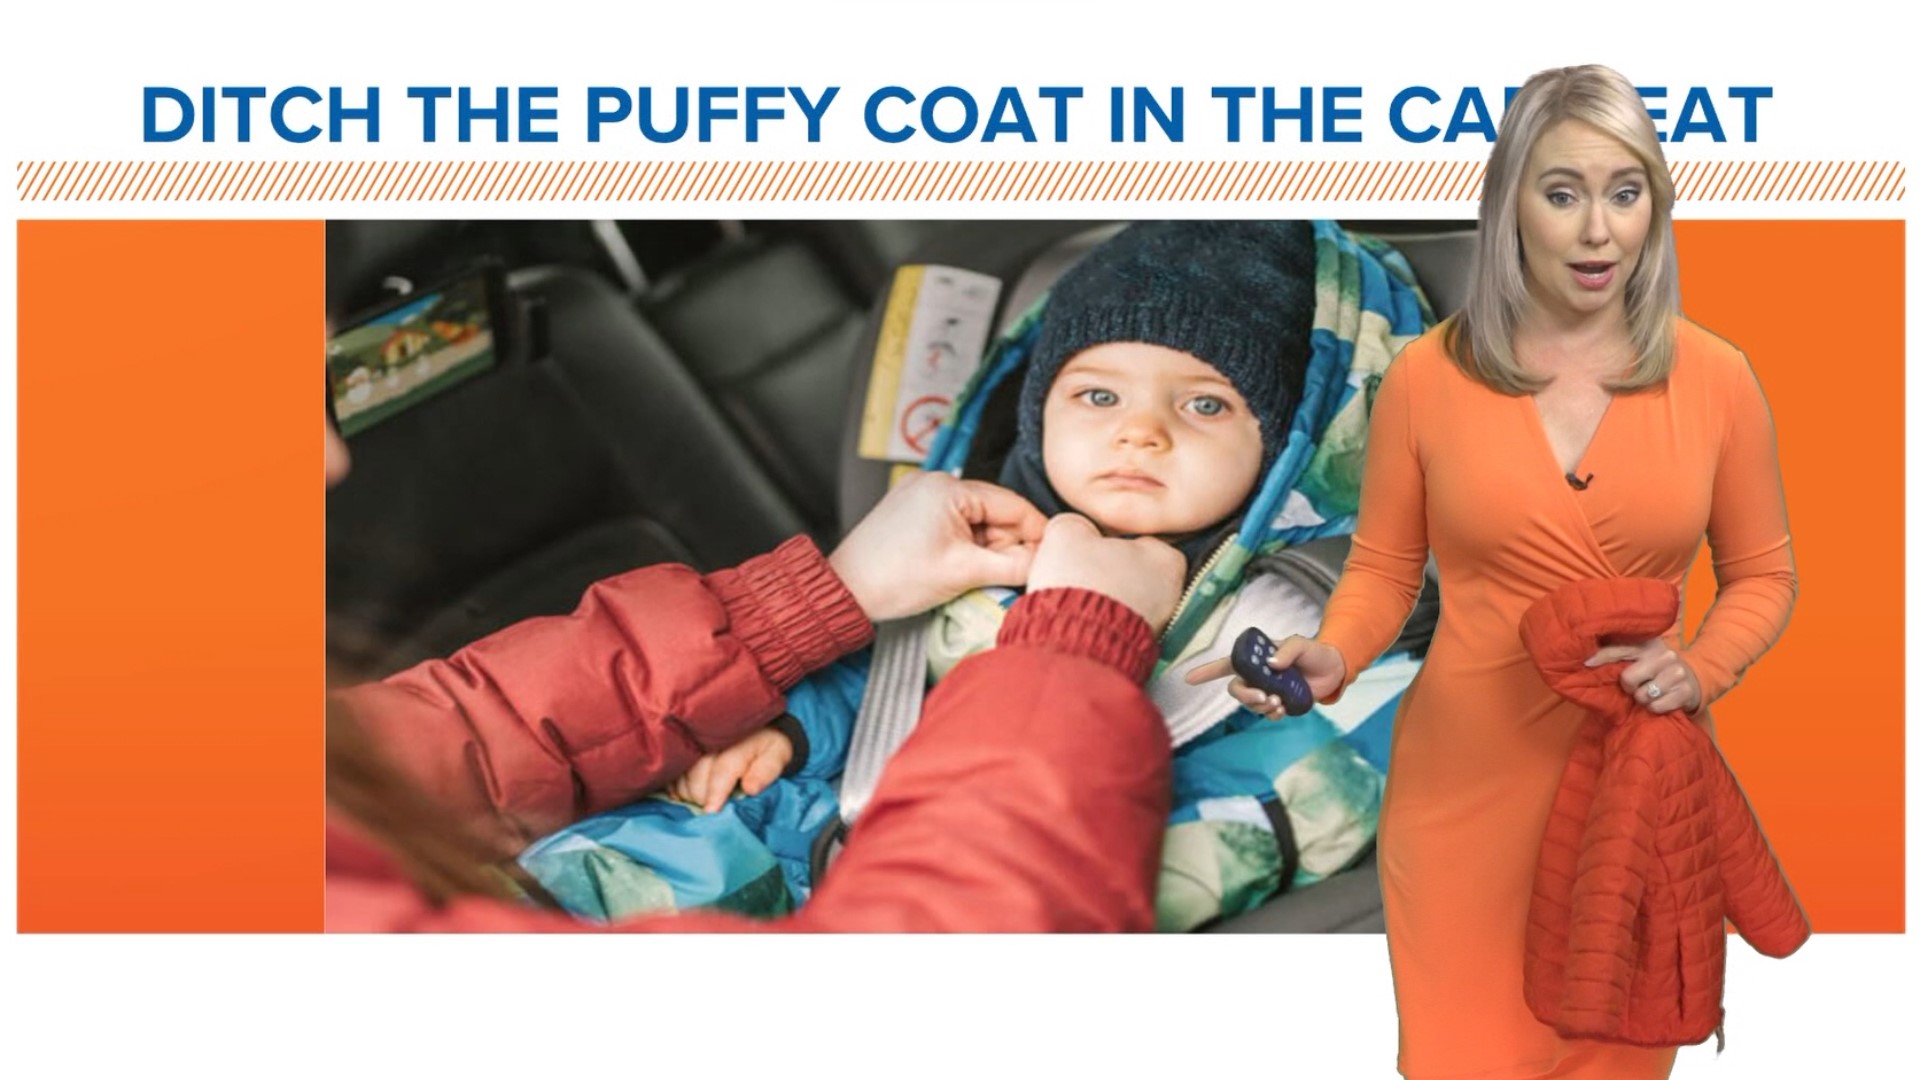 As temperatures drop around the First Coast, it may be natural to dress children who are still in car seats, in puffy coats. Here's why you shouldn't.